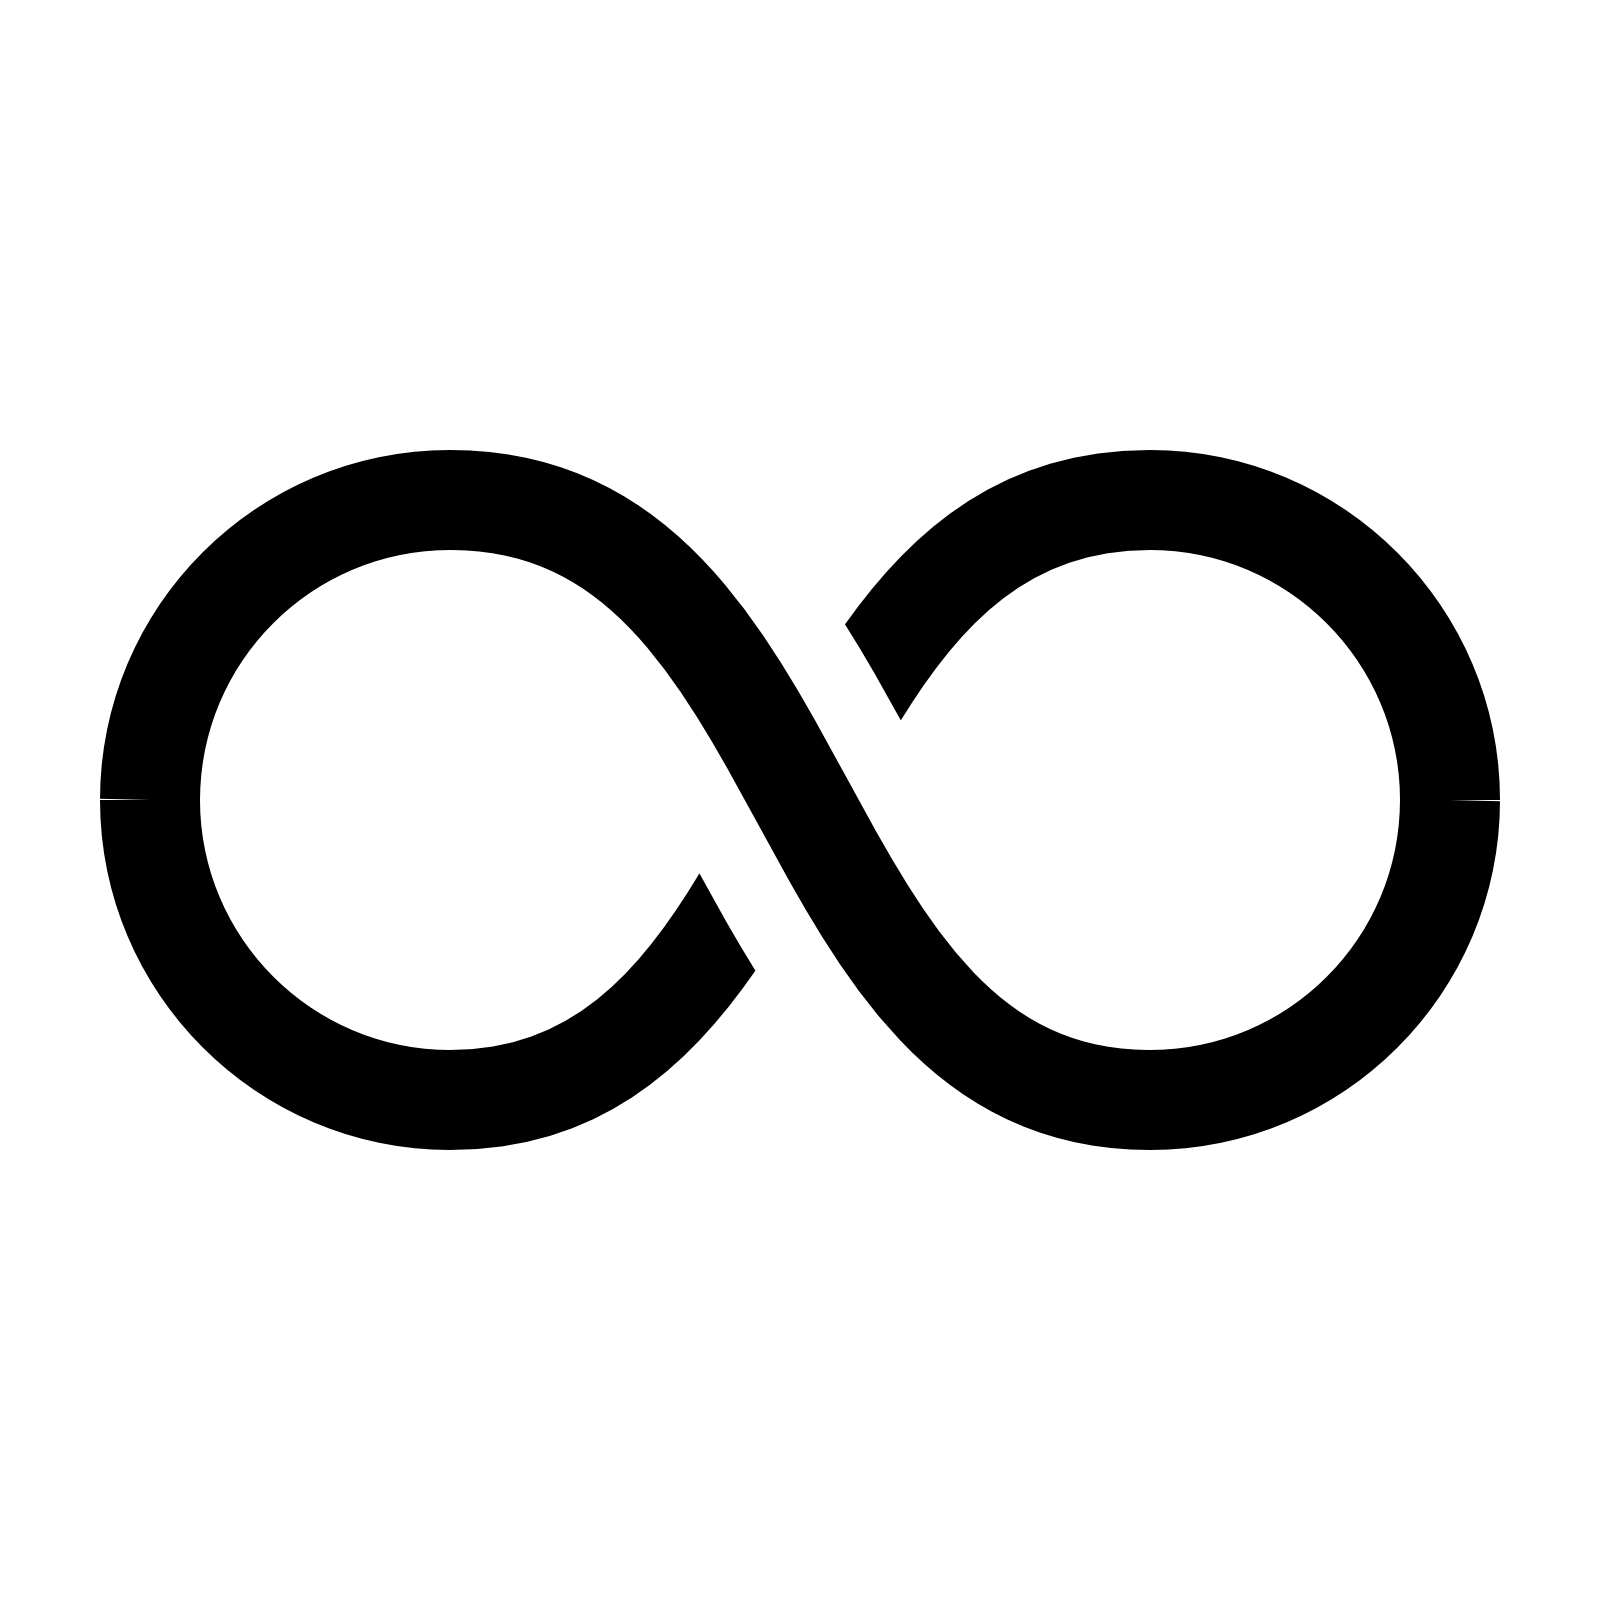 Symbol png images free. Infinity clipart infinity sign